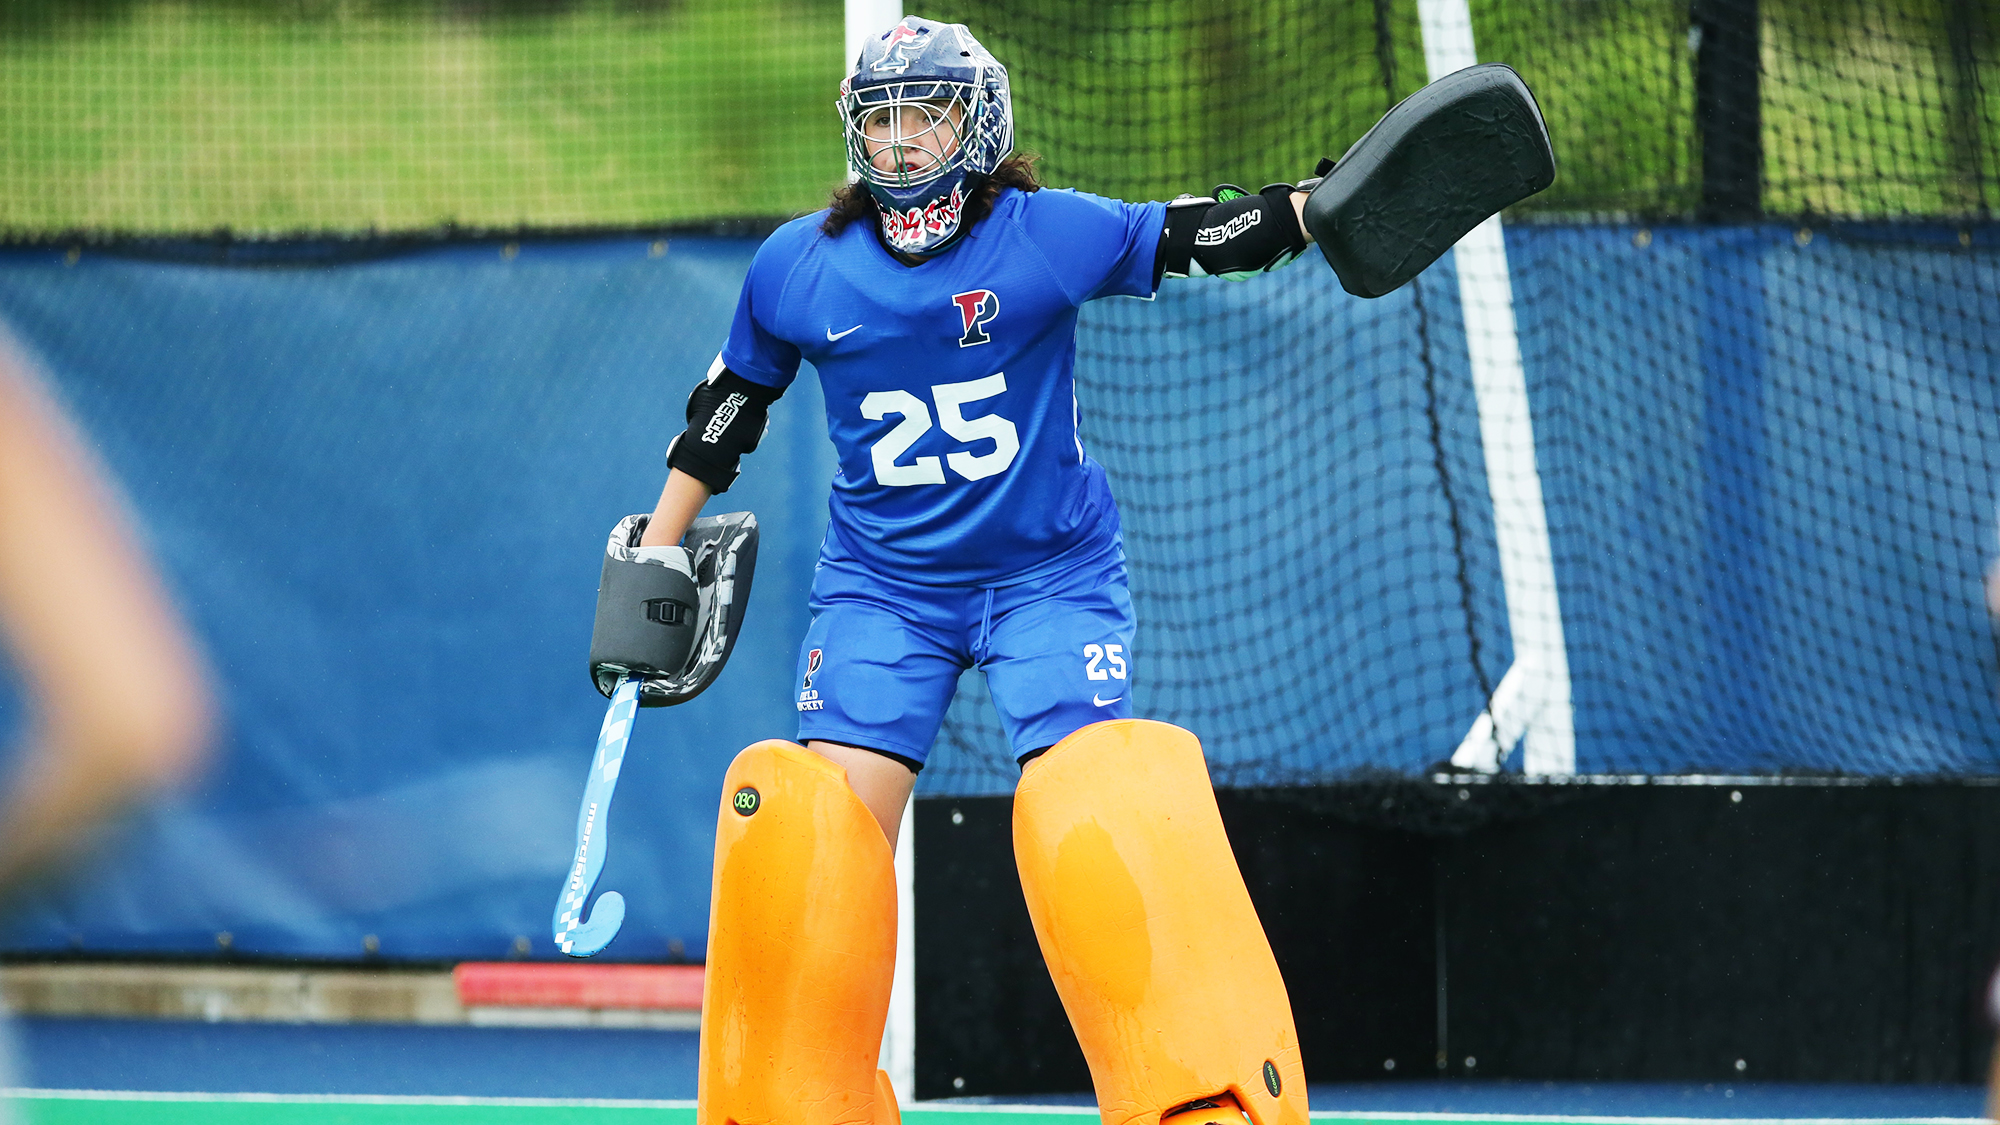 Ava Rosati stands in the goal with her pads on during a game.